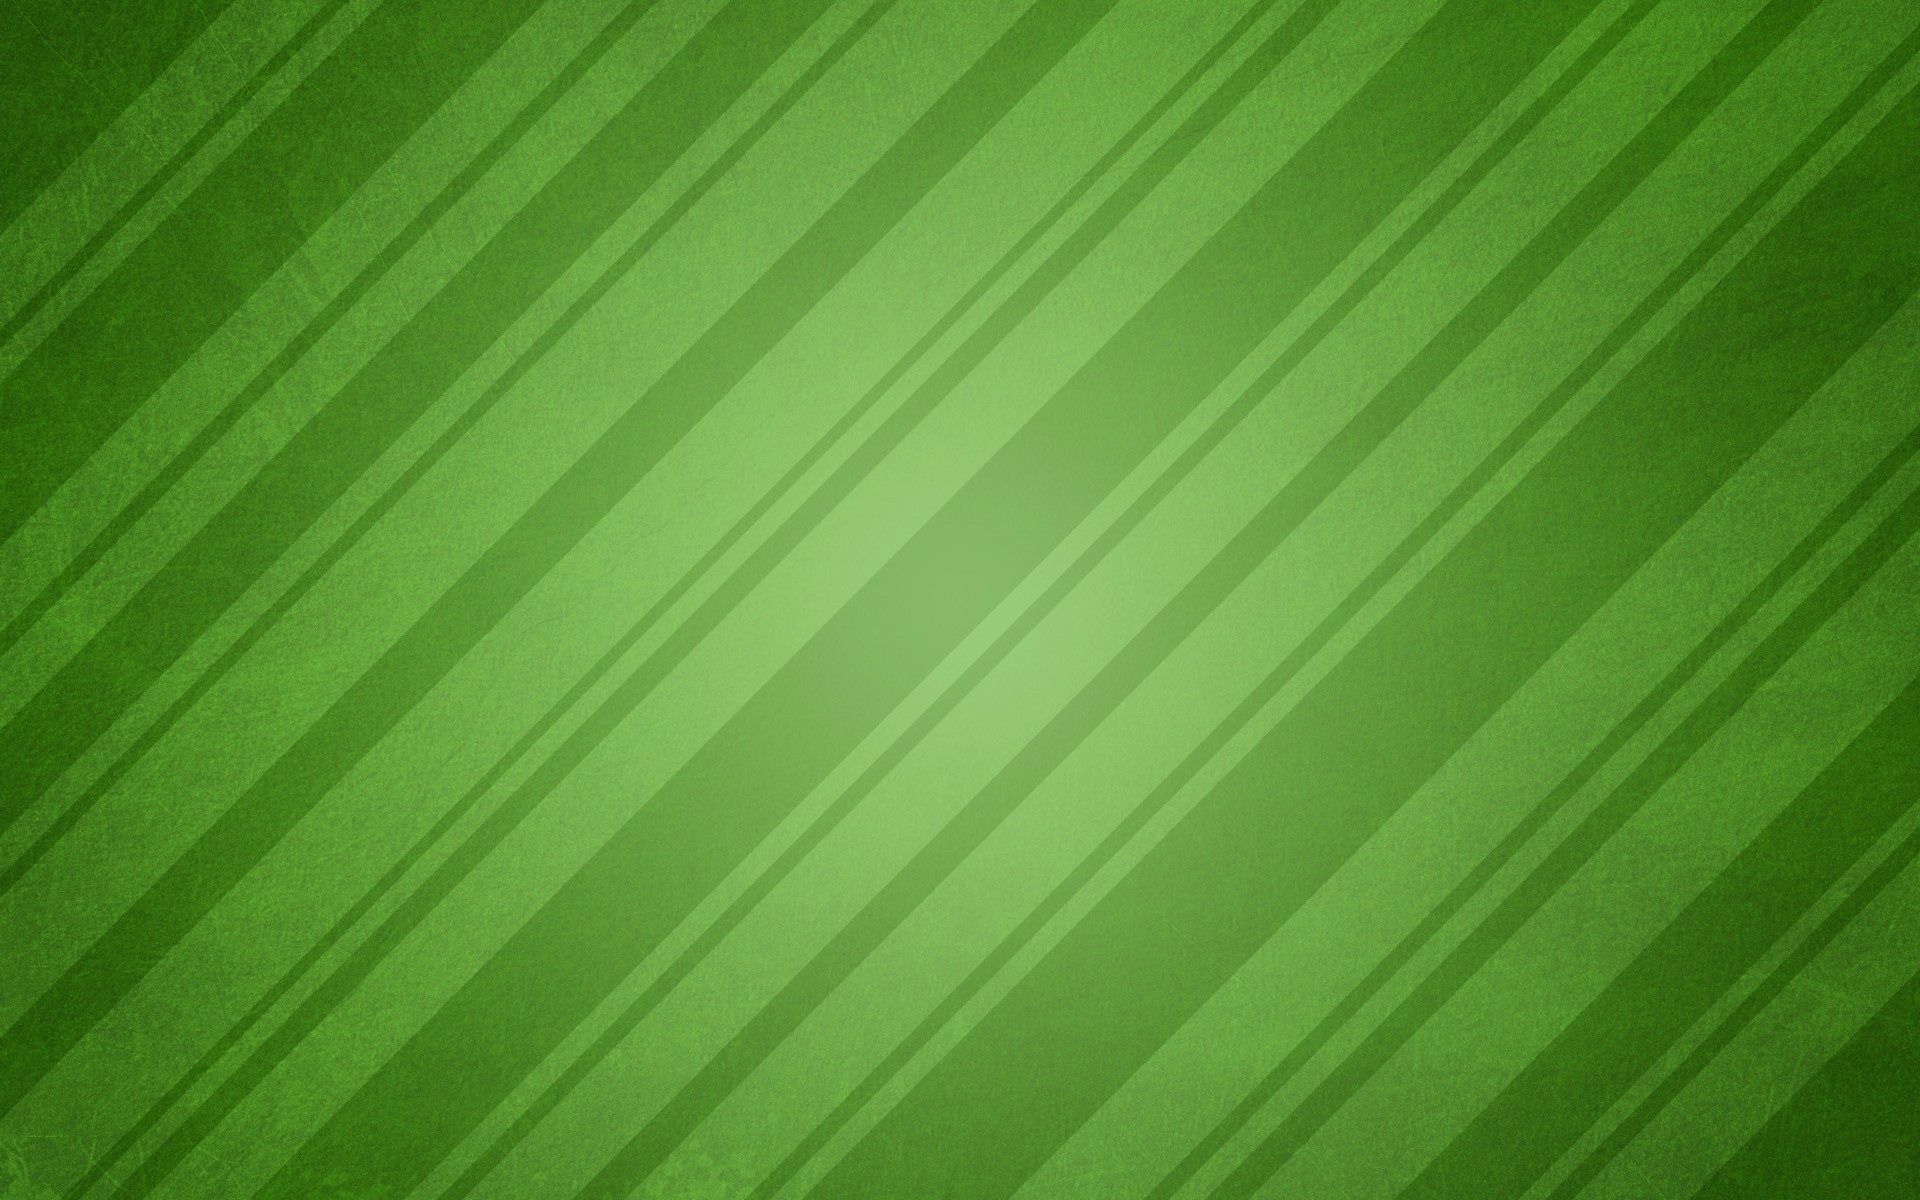 119624 download wallpaper stripes, streaks, texture, lines, textures, obliquely, size screensavers and pictures for free